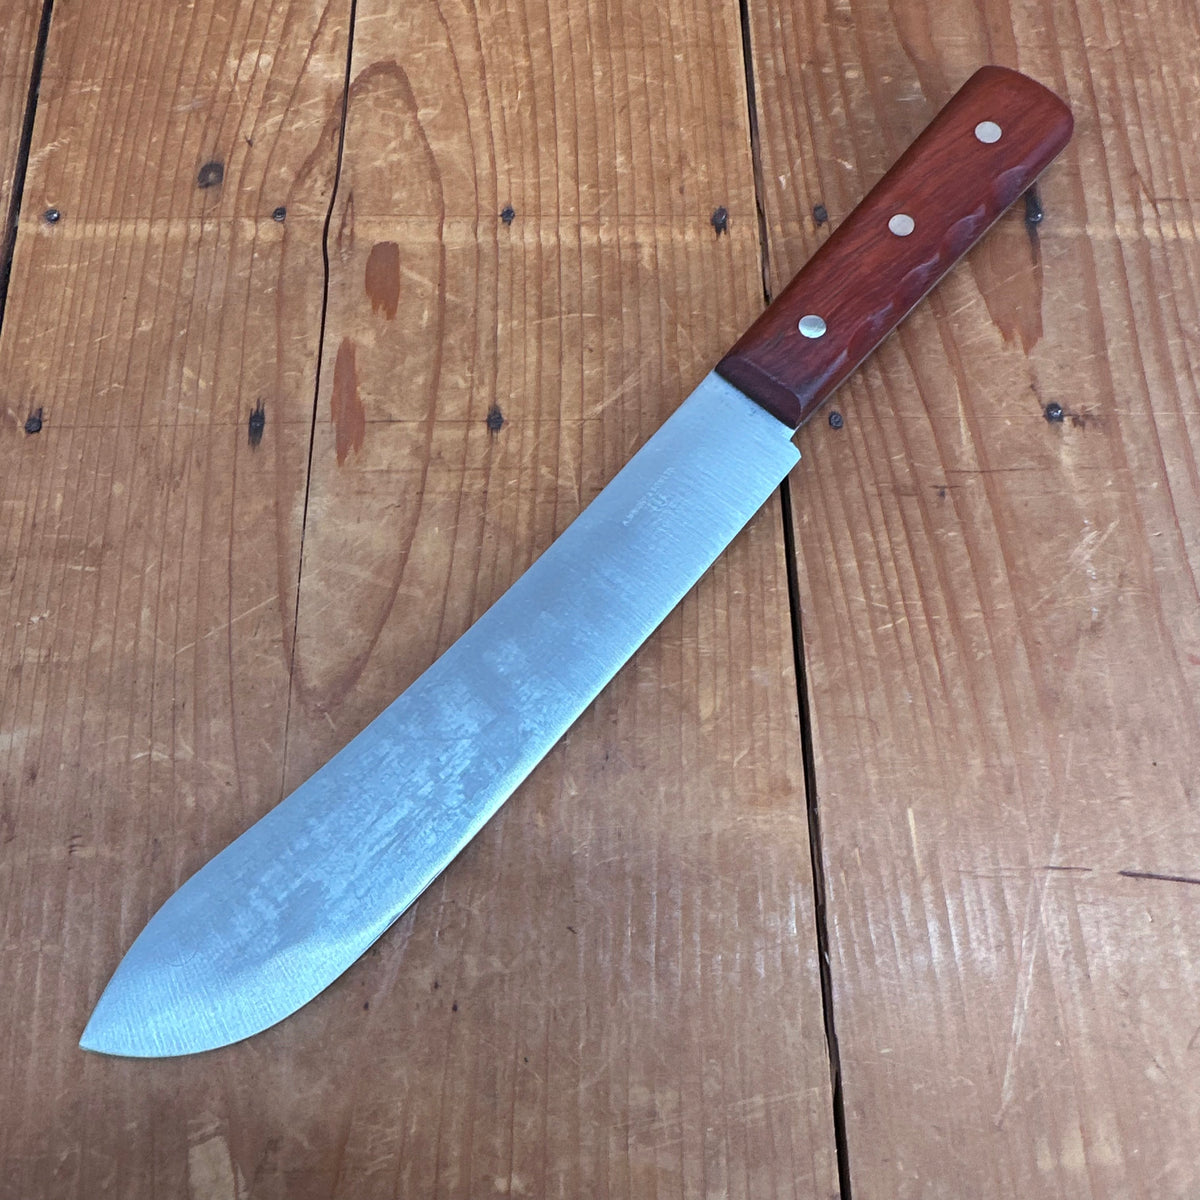 New Vintage A Wright 8" Bullnose Carbon Steel Rosewood Sheffield